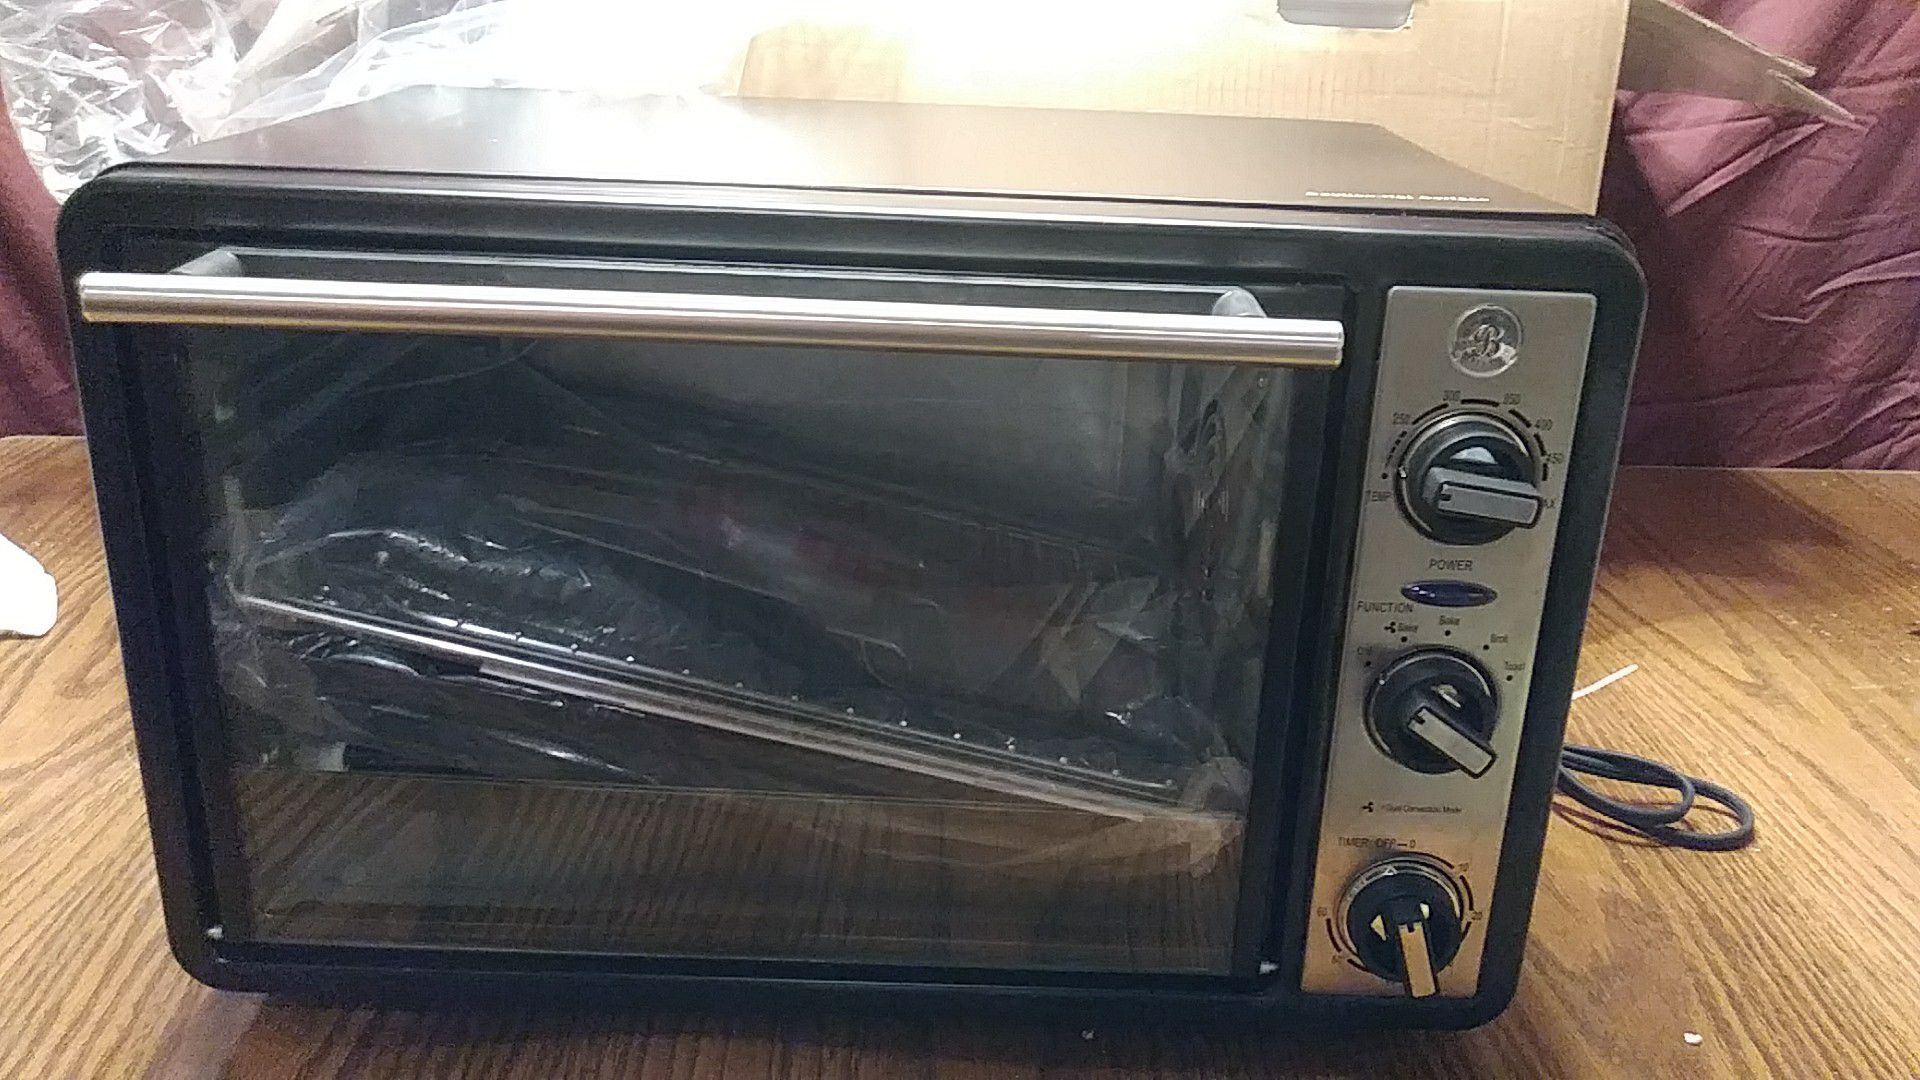 Calphalon Quartz Heat Countertop Toaster Oven, Stainless Steel, Extra-Large  Capacity, Black, Dark Gray for Sale in Escondido, CA - OfferUp